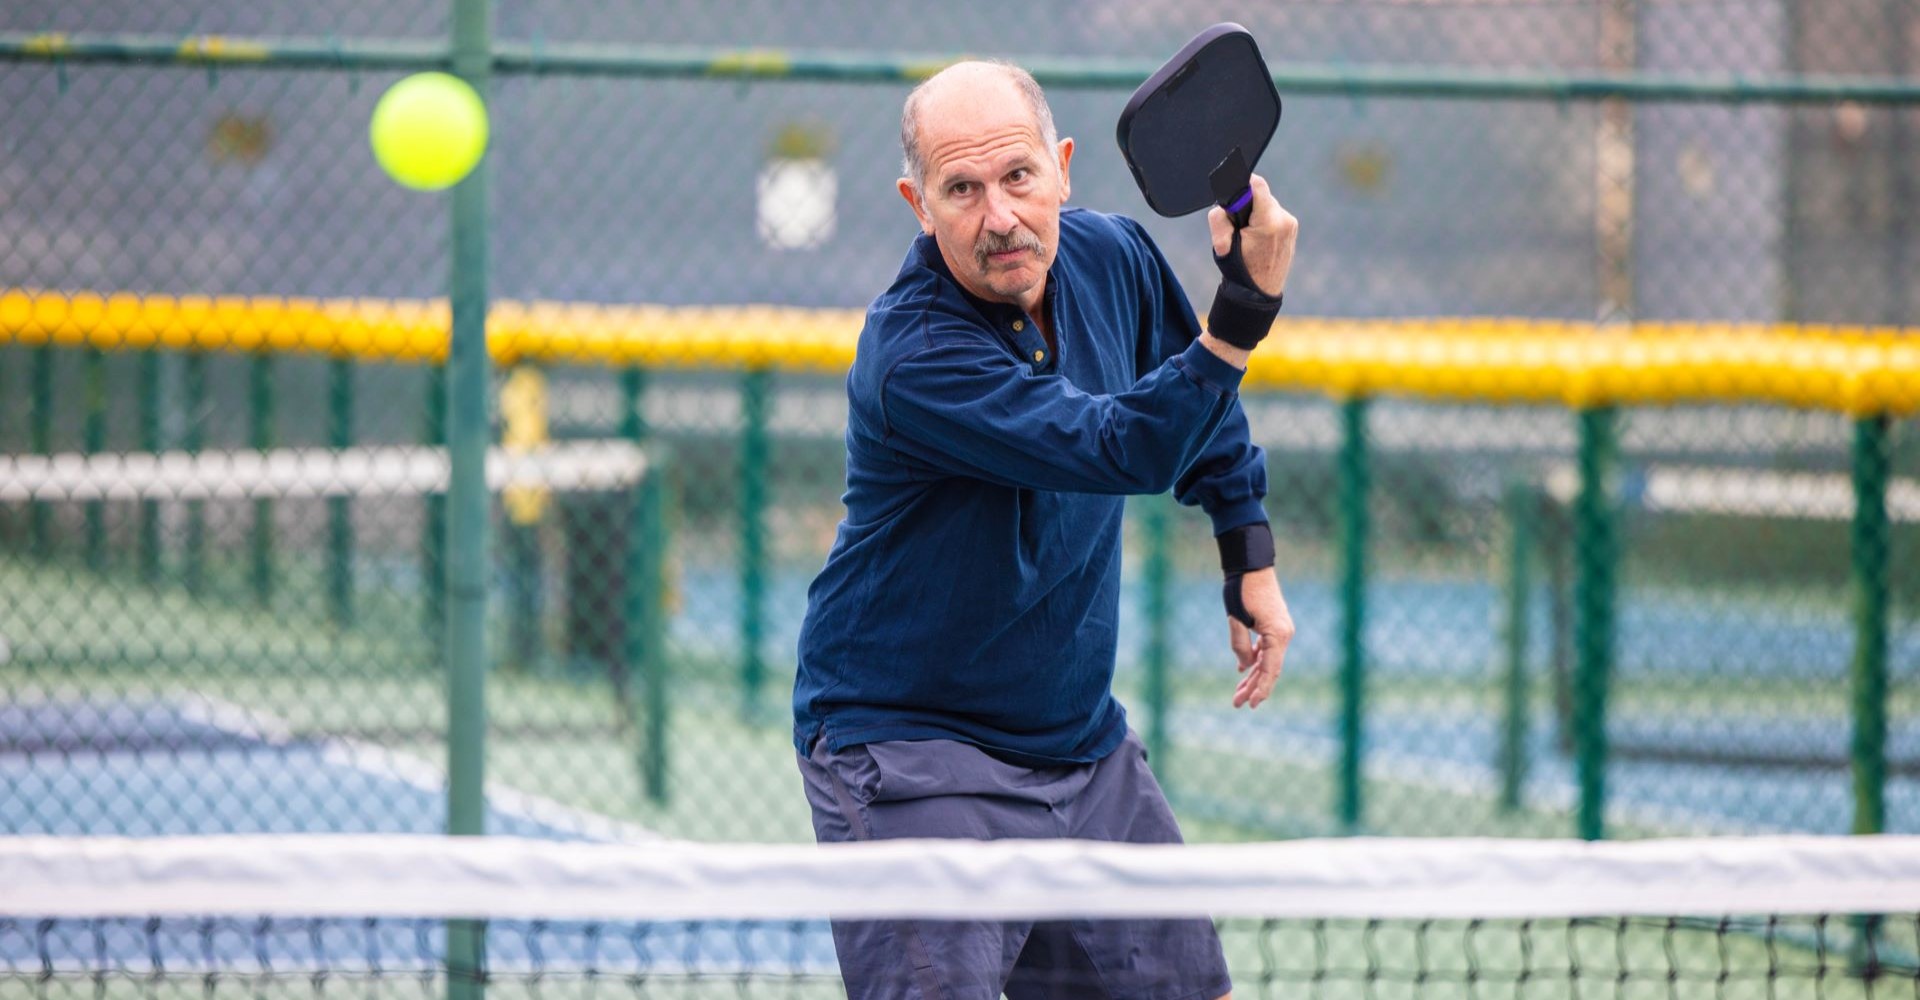 Outdoors Pickleball Court with senior man.